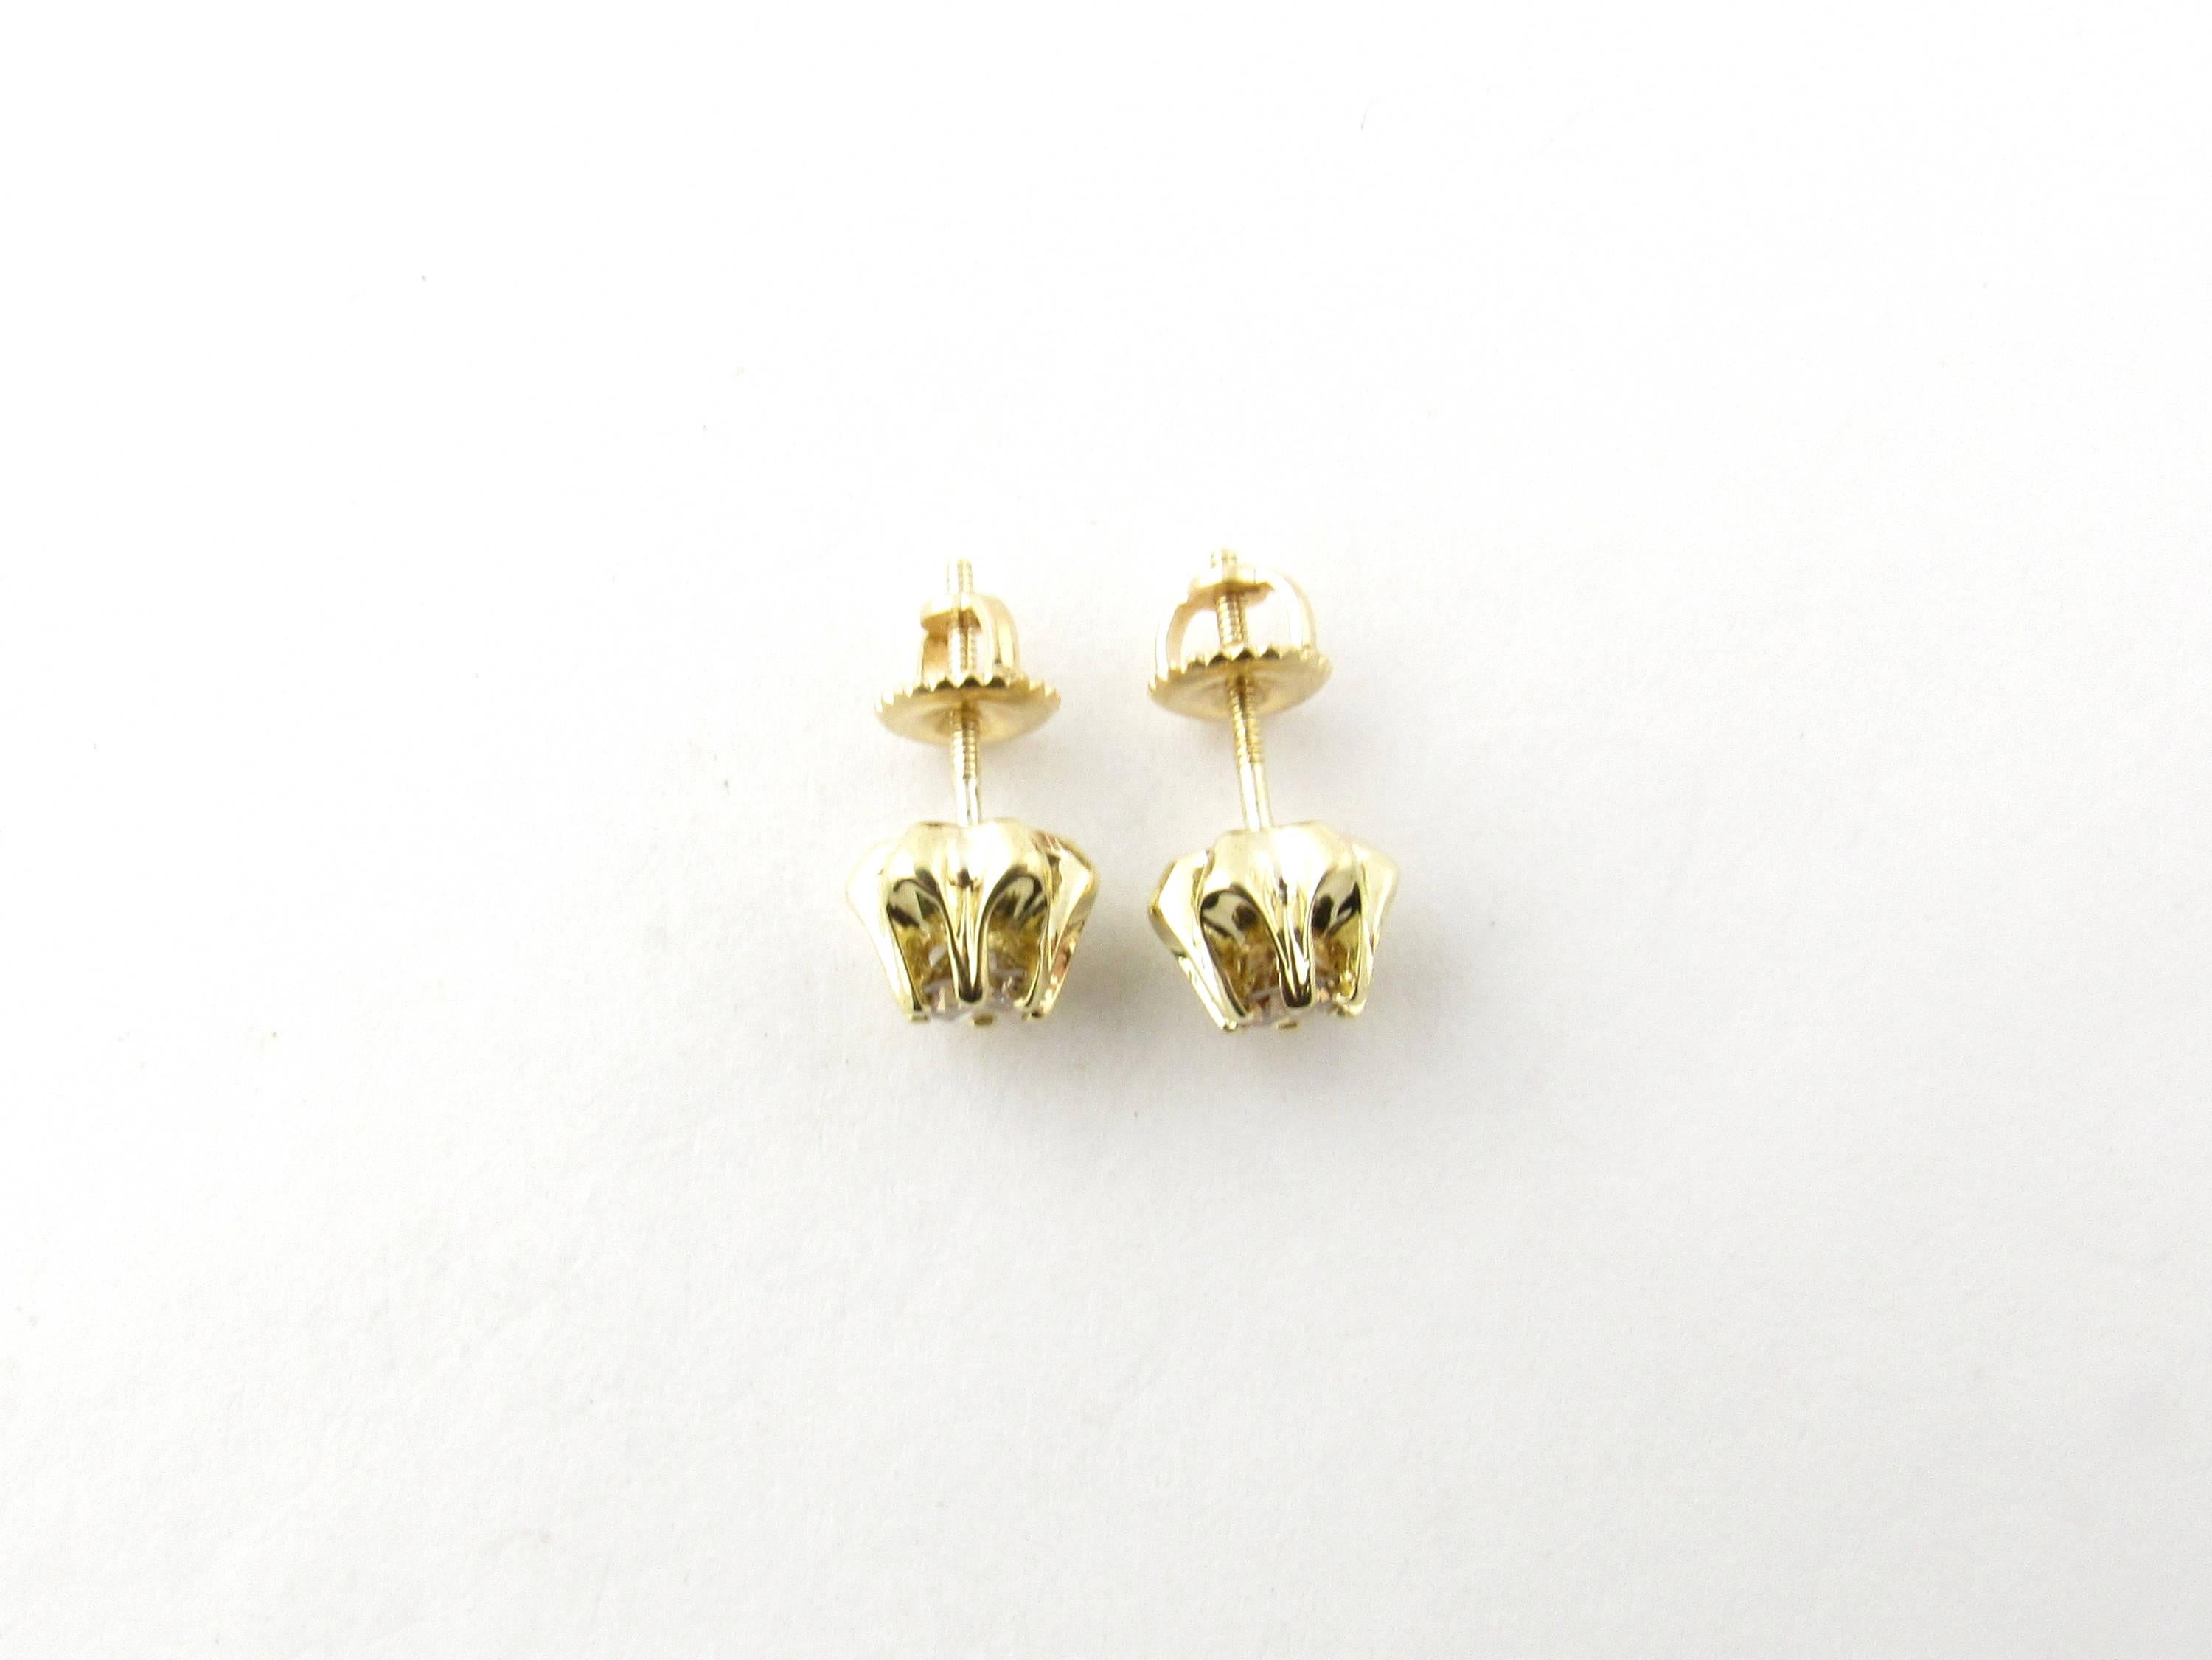 Vintage 14 Karat Yellow Gold Champagne Diamond Earrings

These sparkling earrings each feature one round brilliant cut champagne diamond set in beautifully detailed 14K yellow gold. Screw back closures.

Approximate total diamond weight: .60